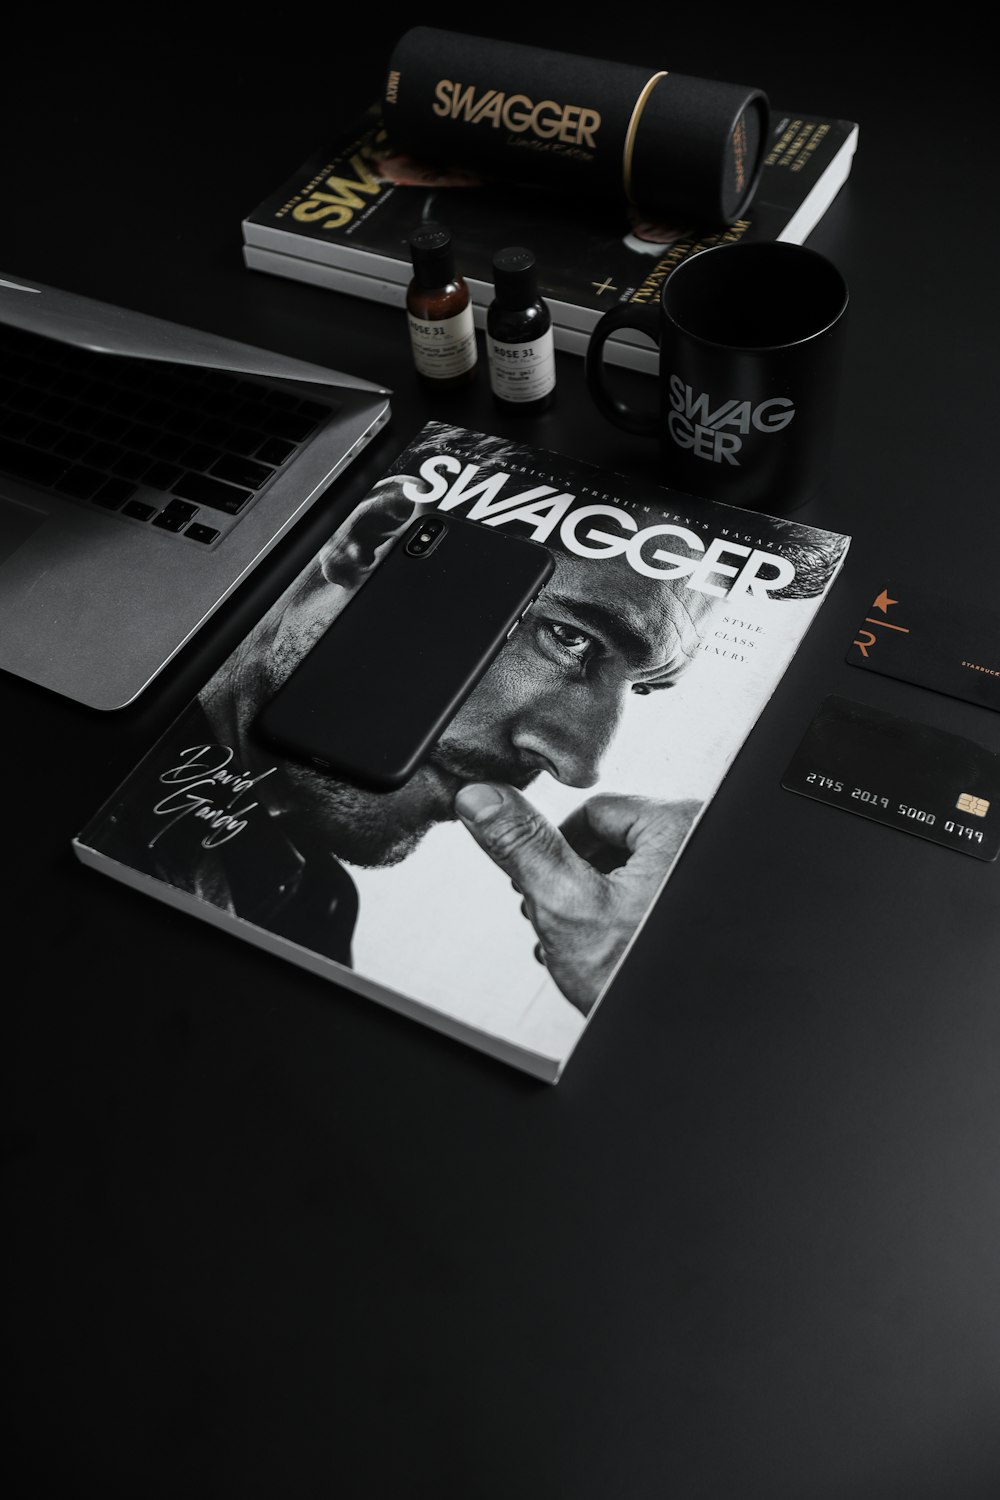 iPhone on top of Swagger magazine